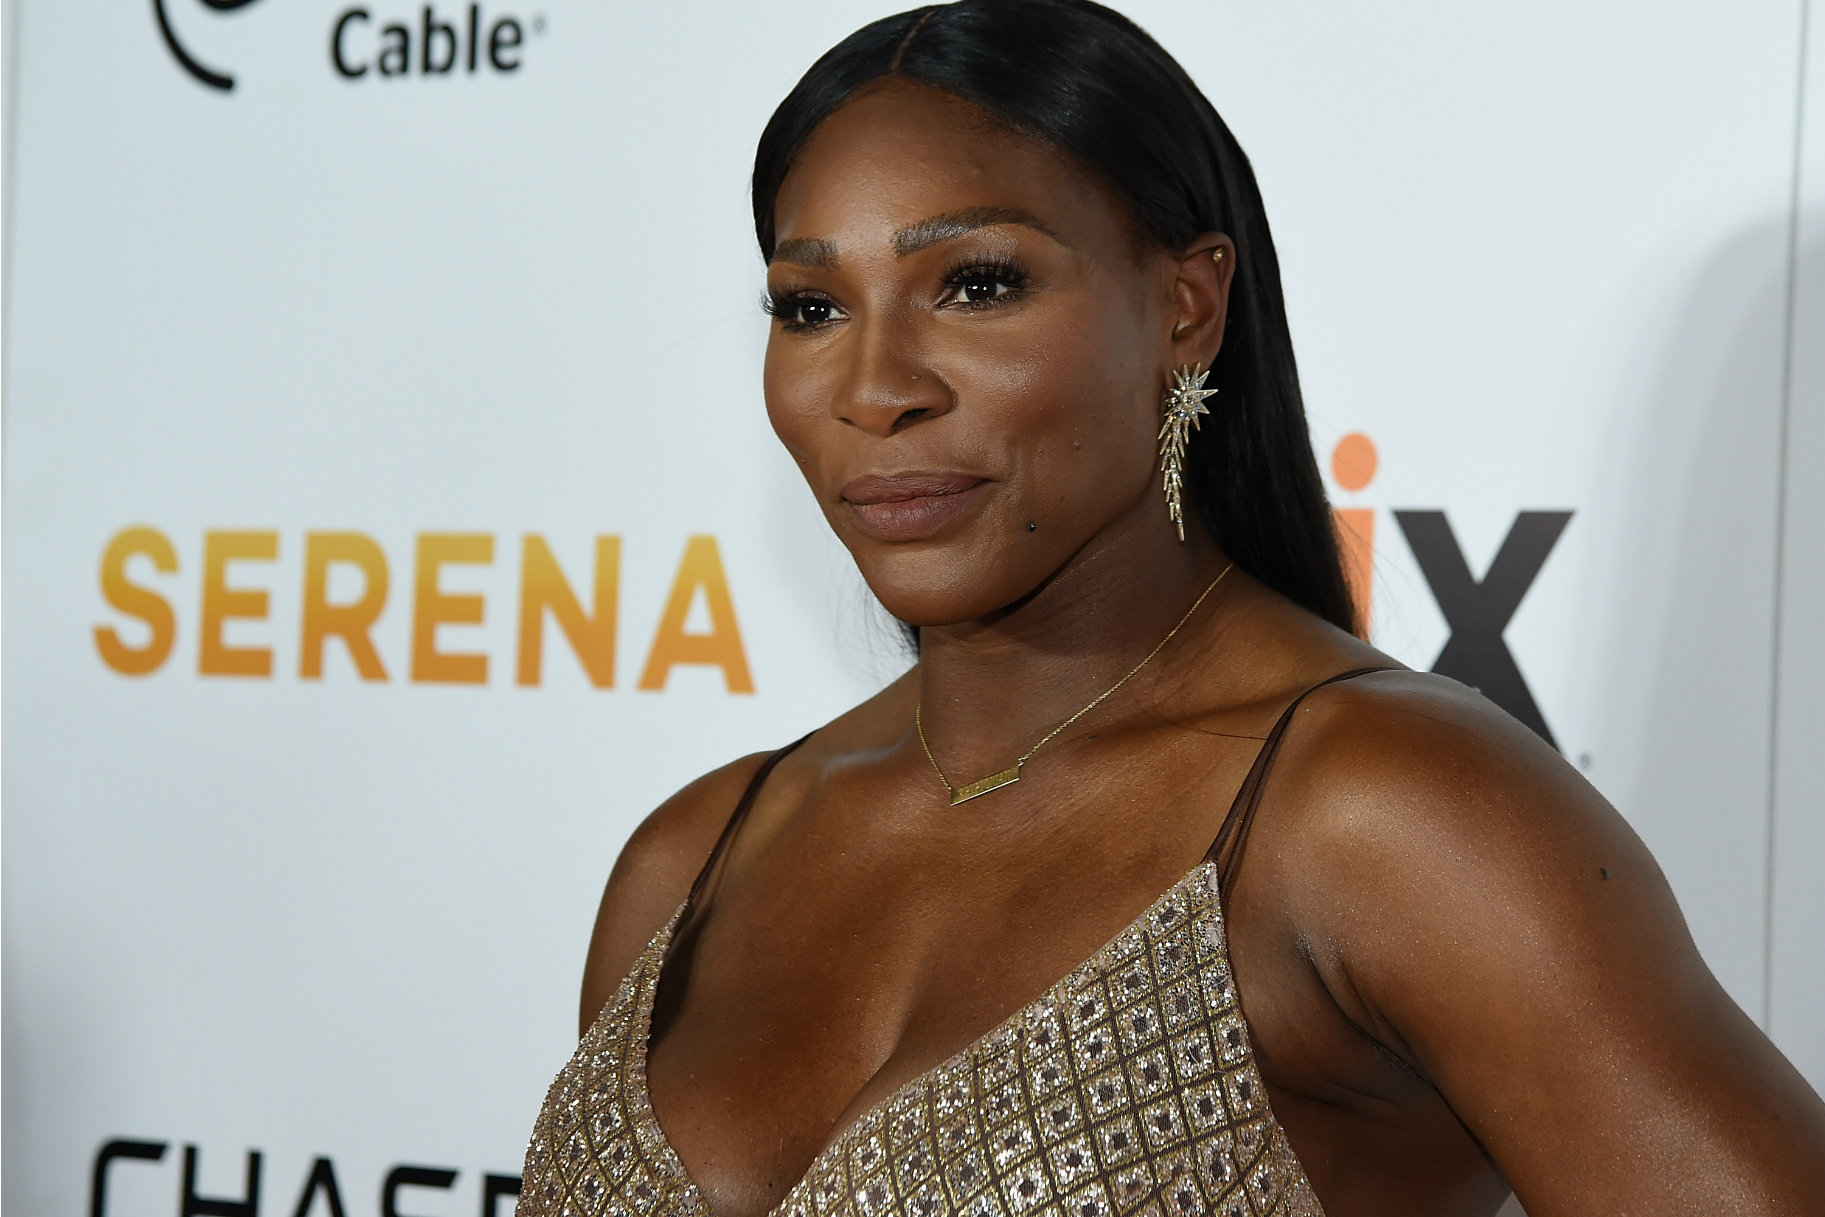 Pregnant Serena Williams Posed Nude For A Magazine Cover And Totally